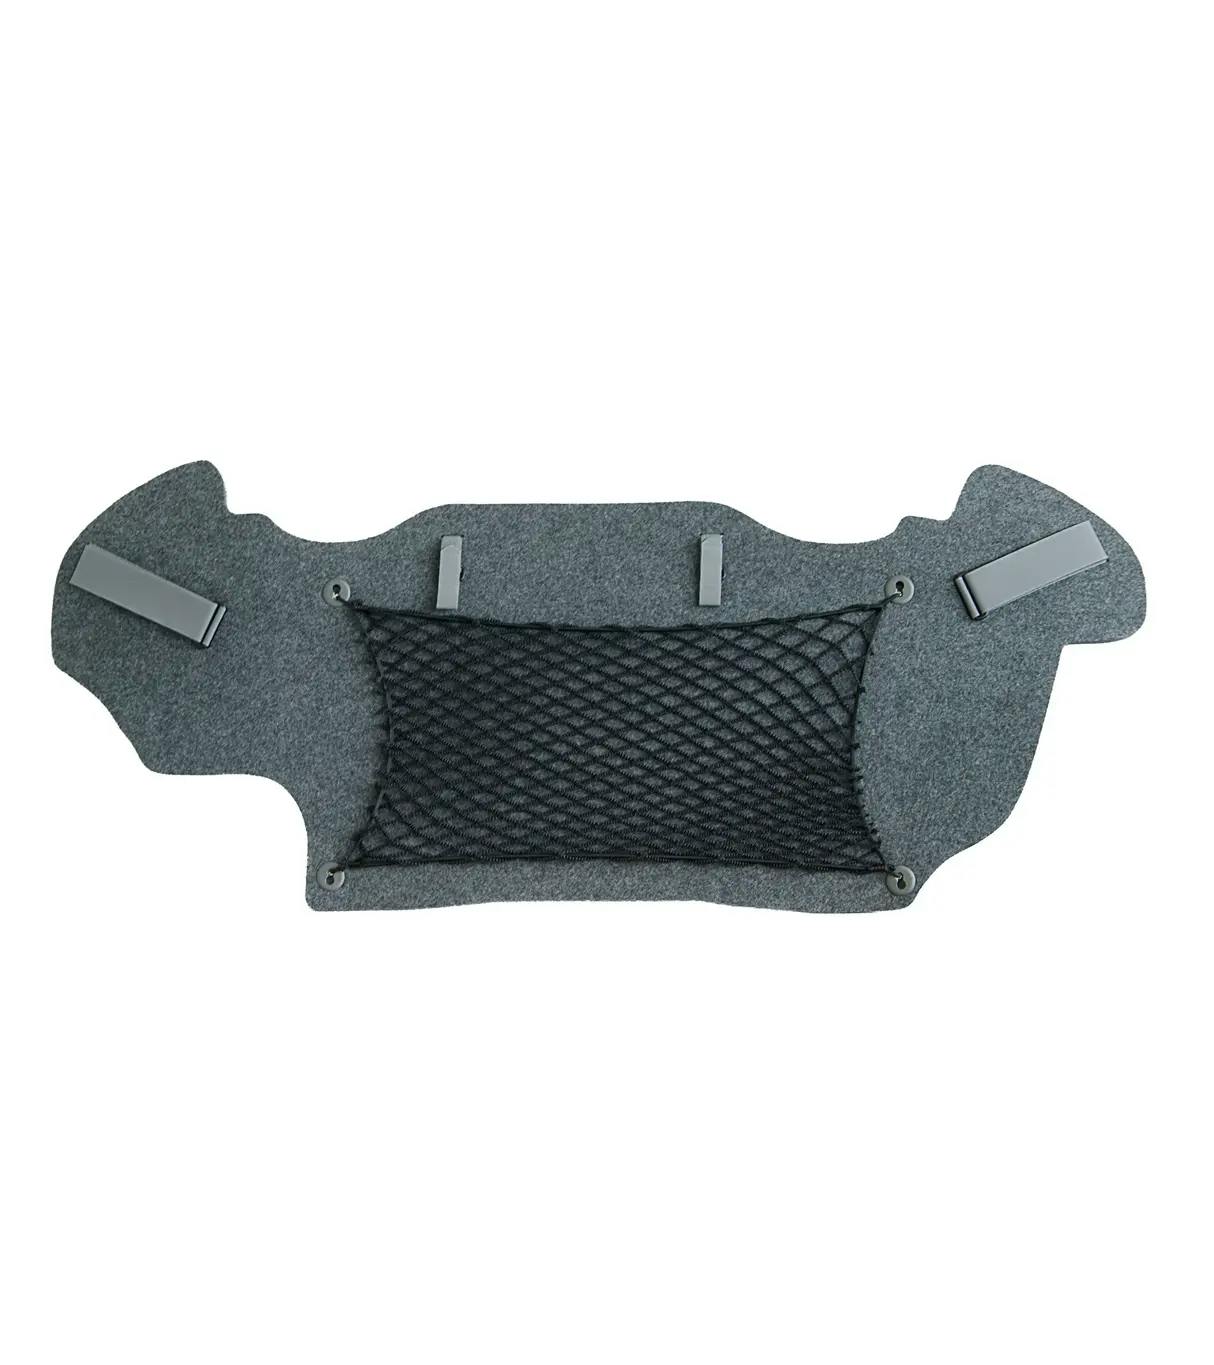 Luggage net for luggage compartment with attachment for Porsche 986 1